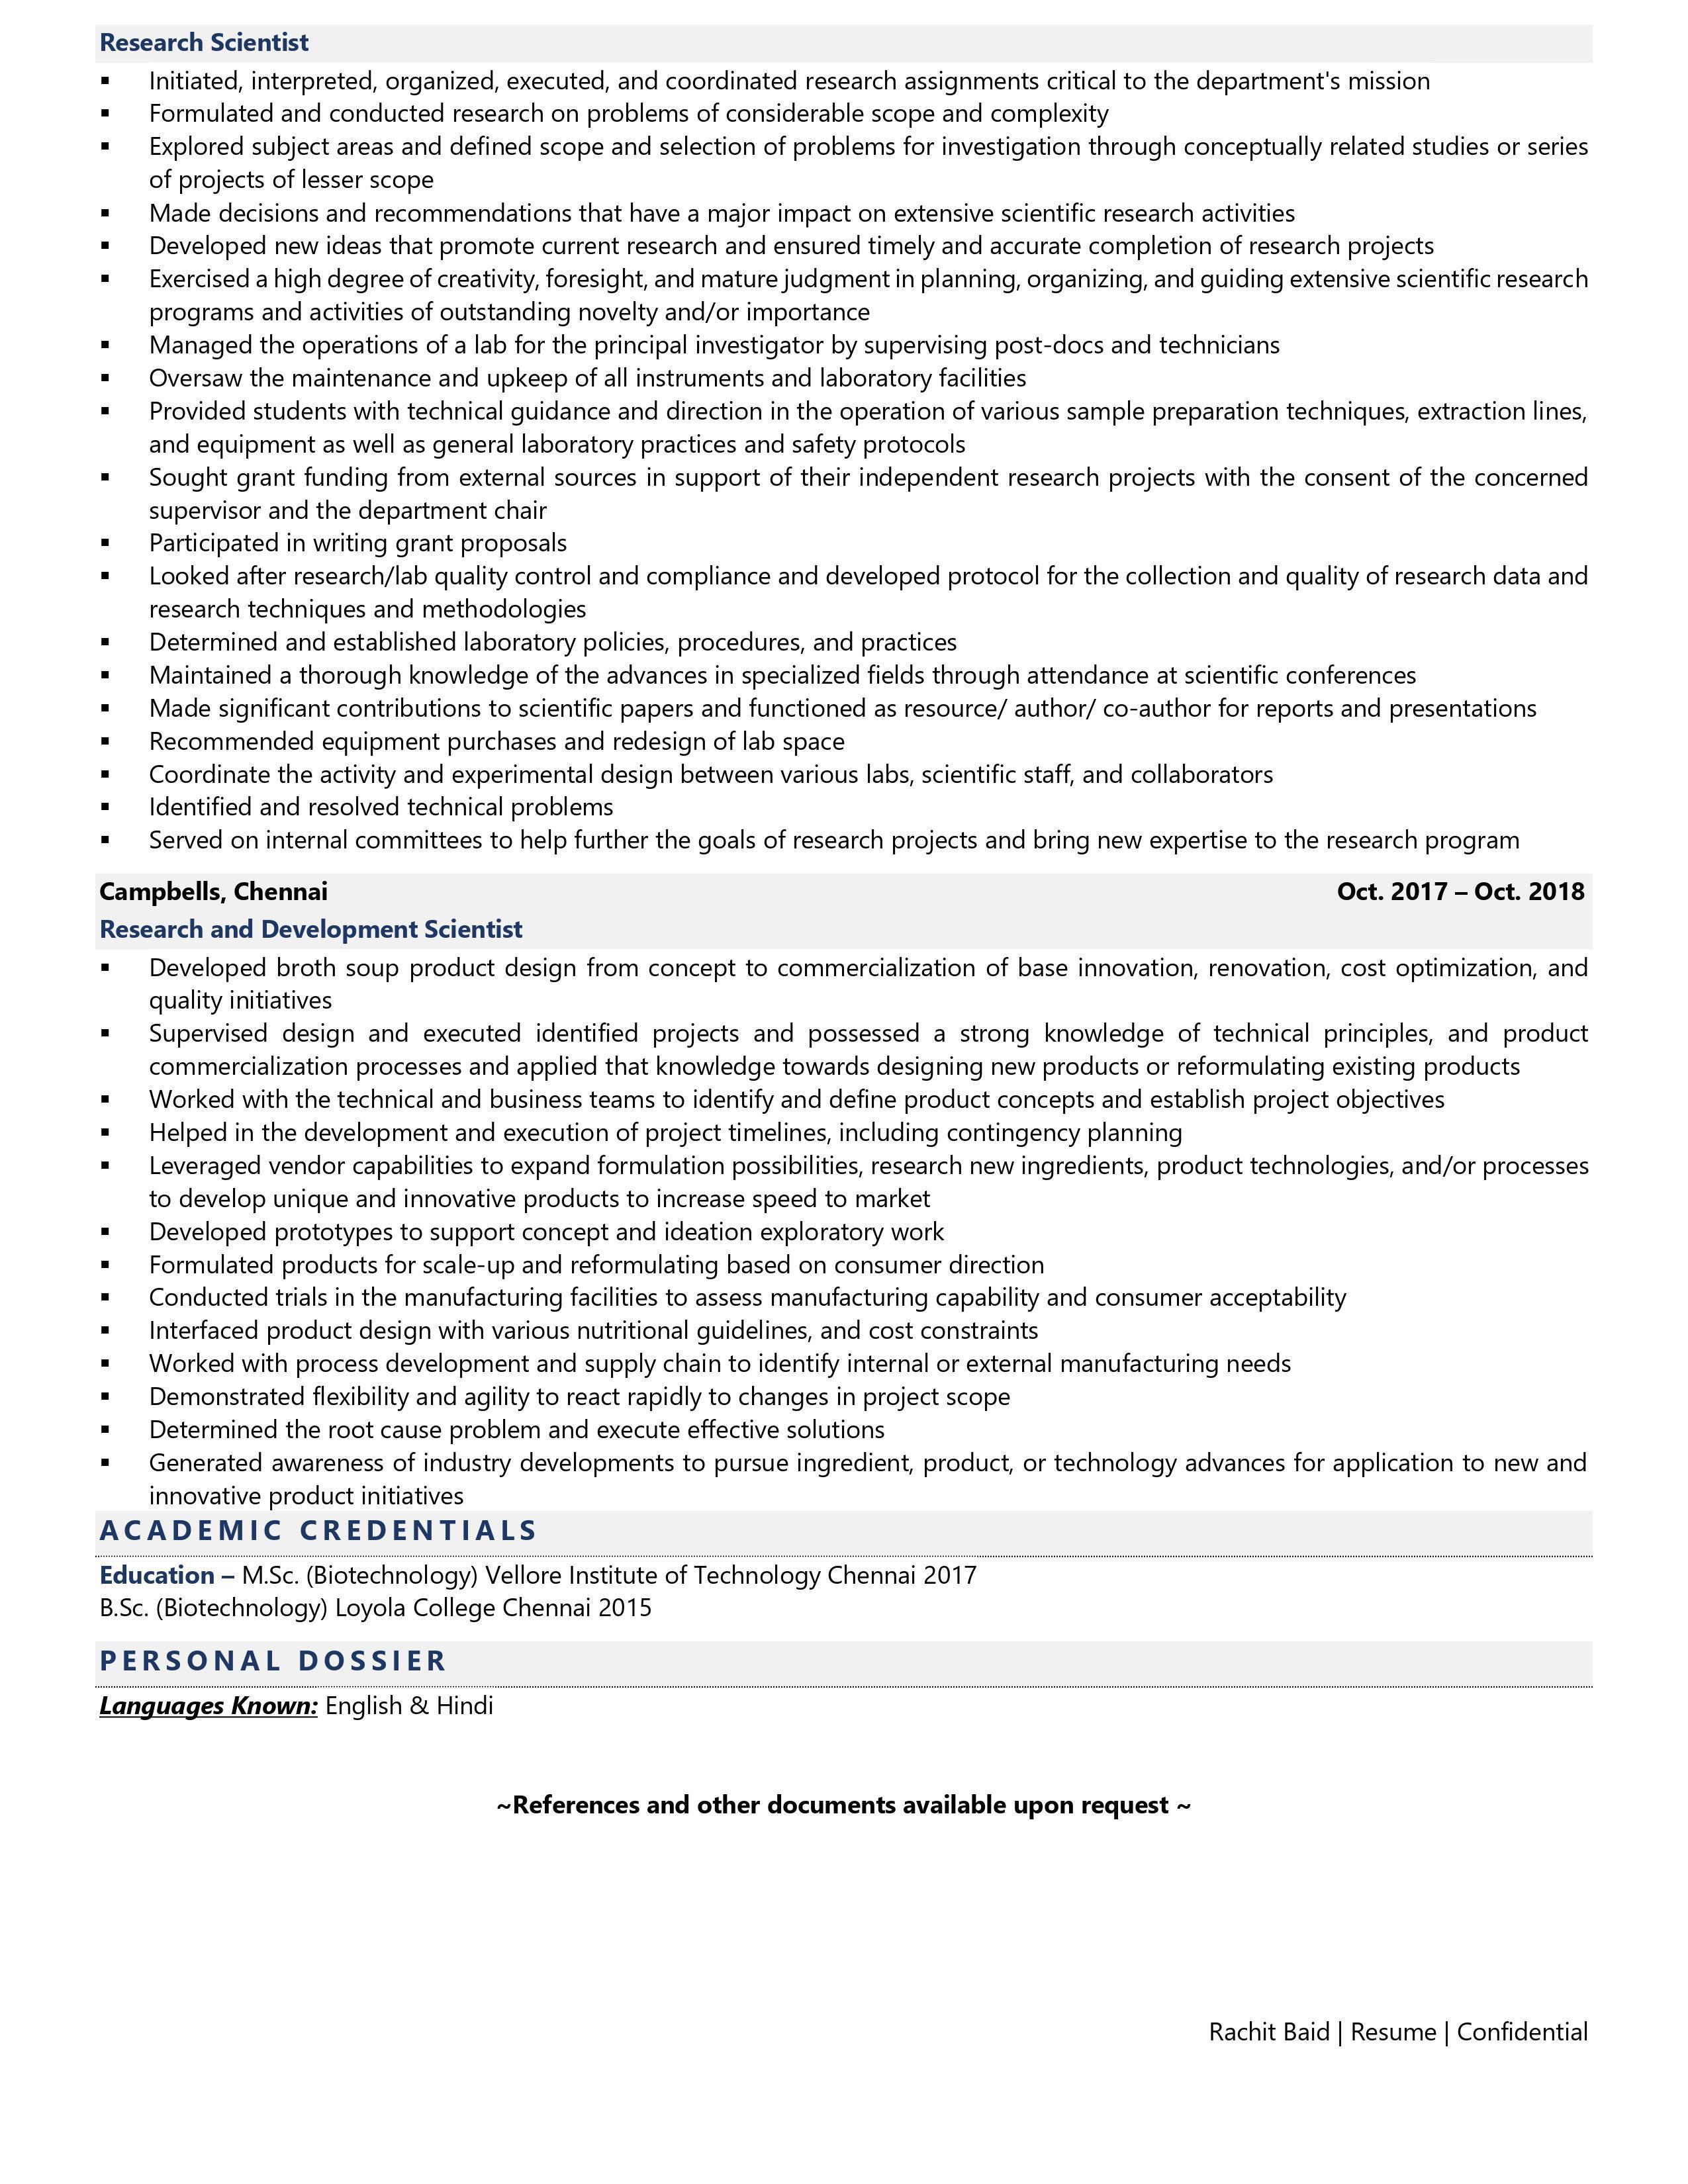 Research Scientist - Resume Example & Template